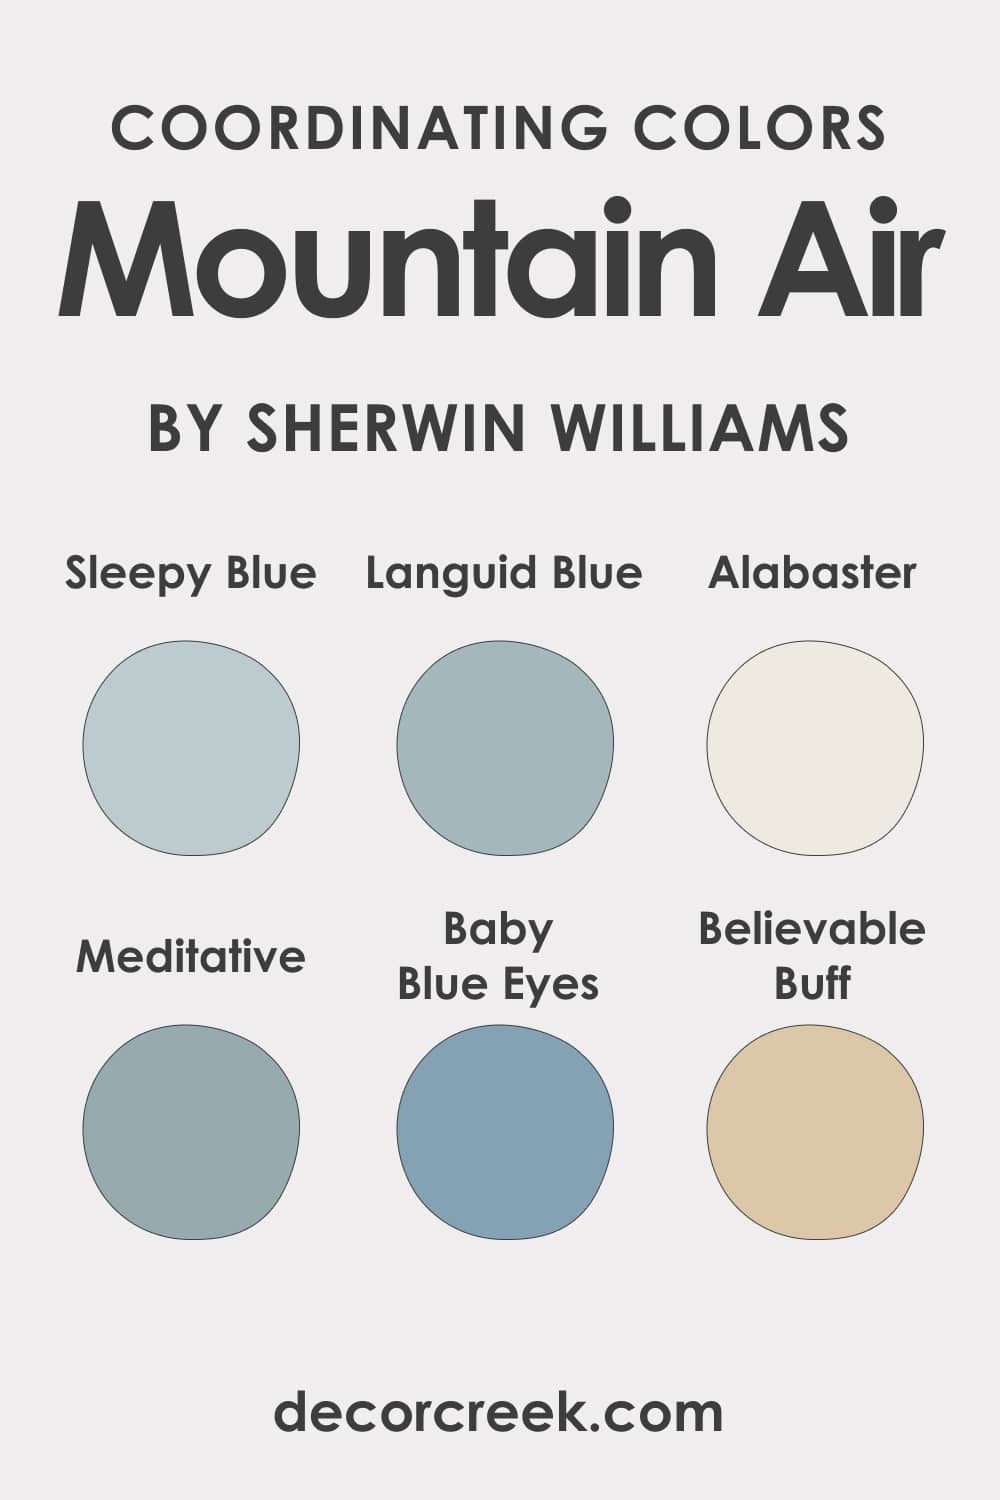 Coordinating Colors of Mountain Air SW-6224